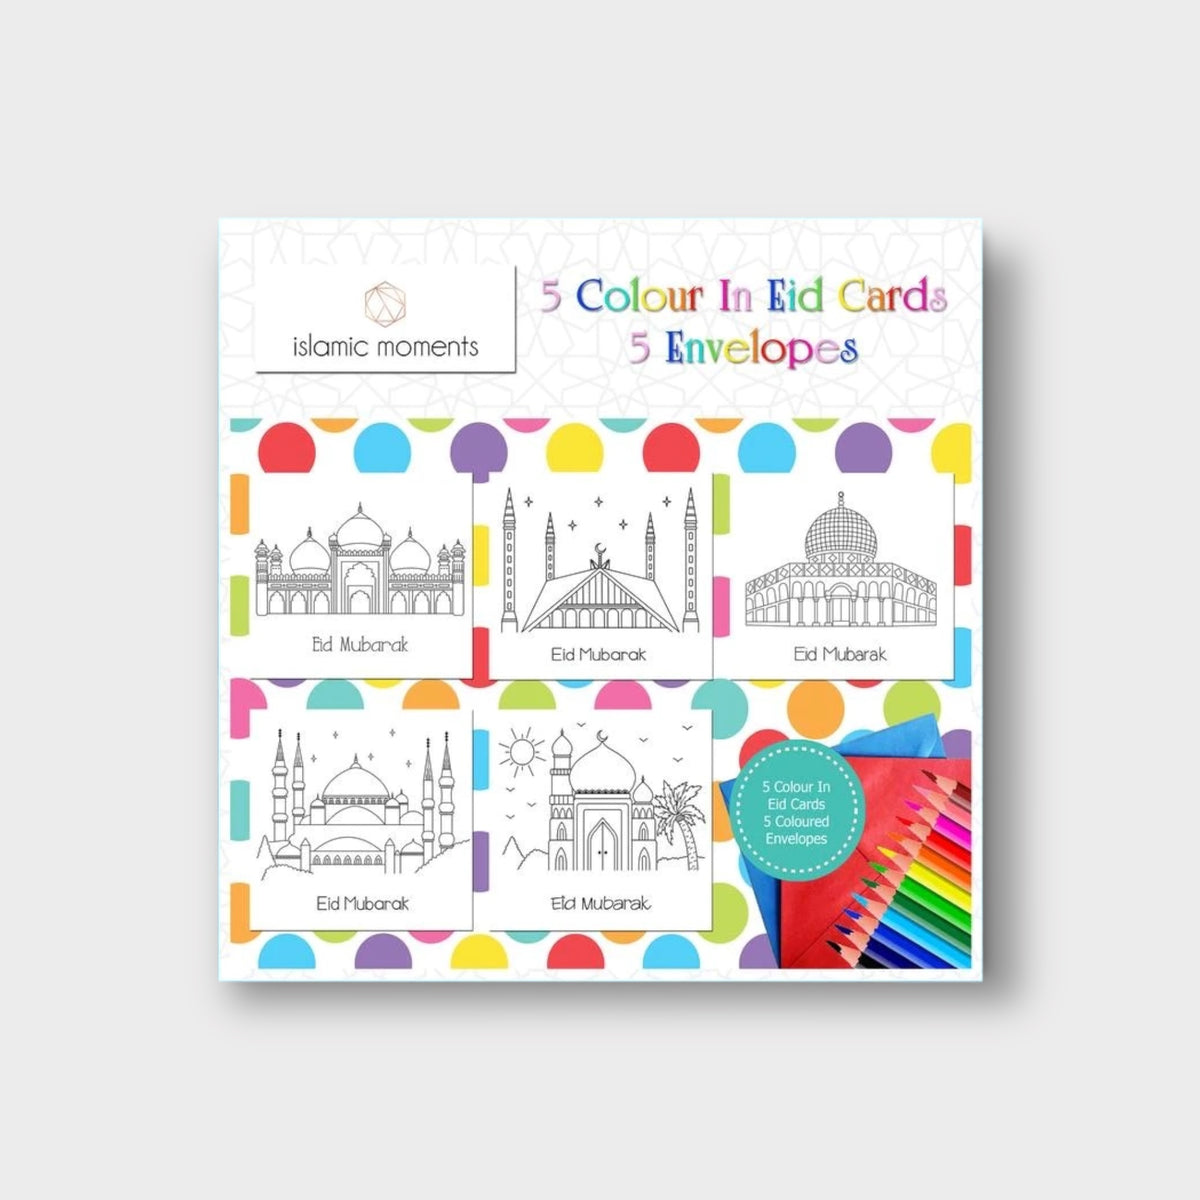 Colour In Eid Cards